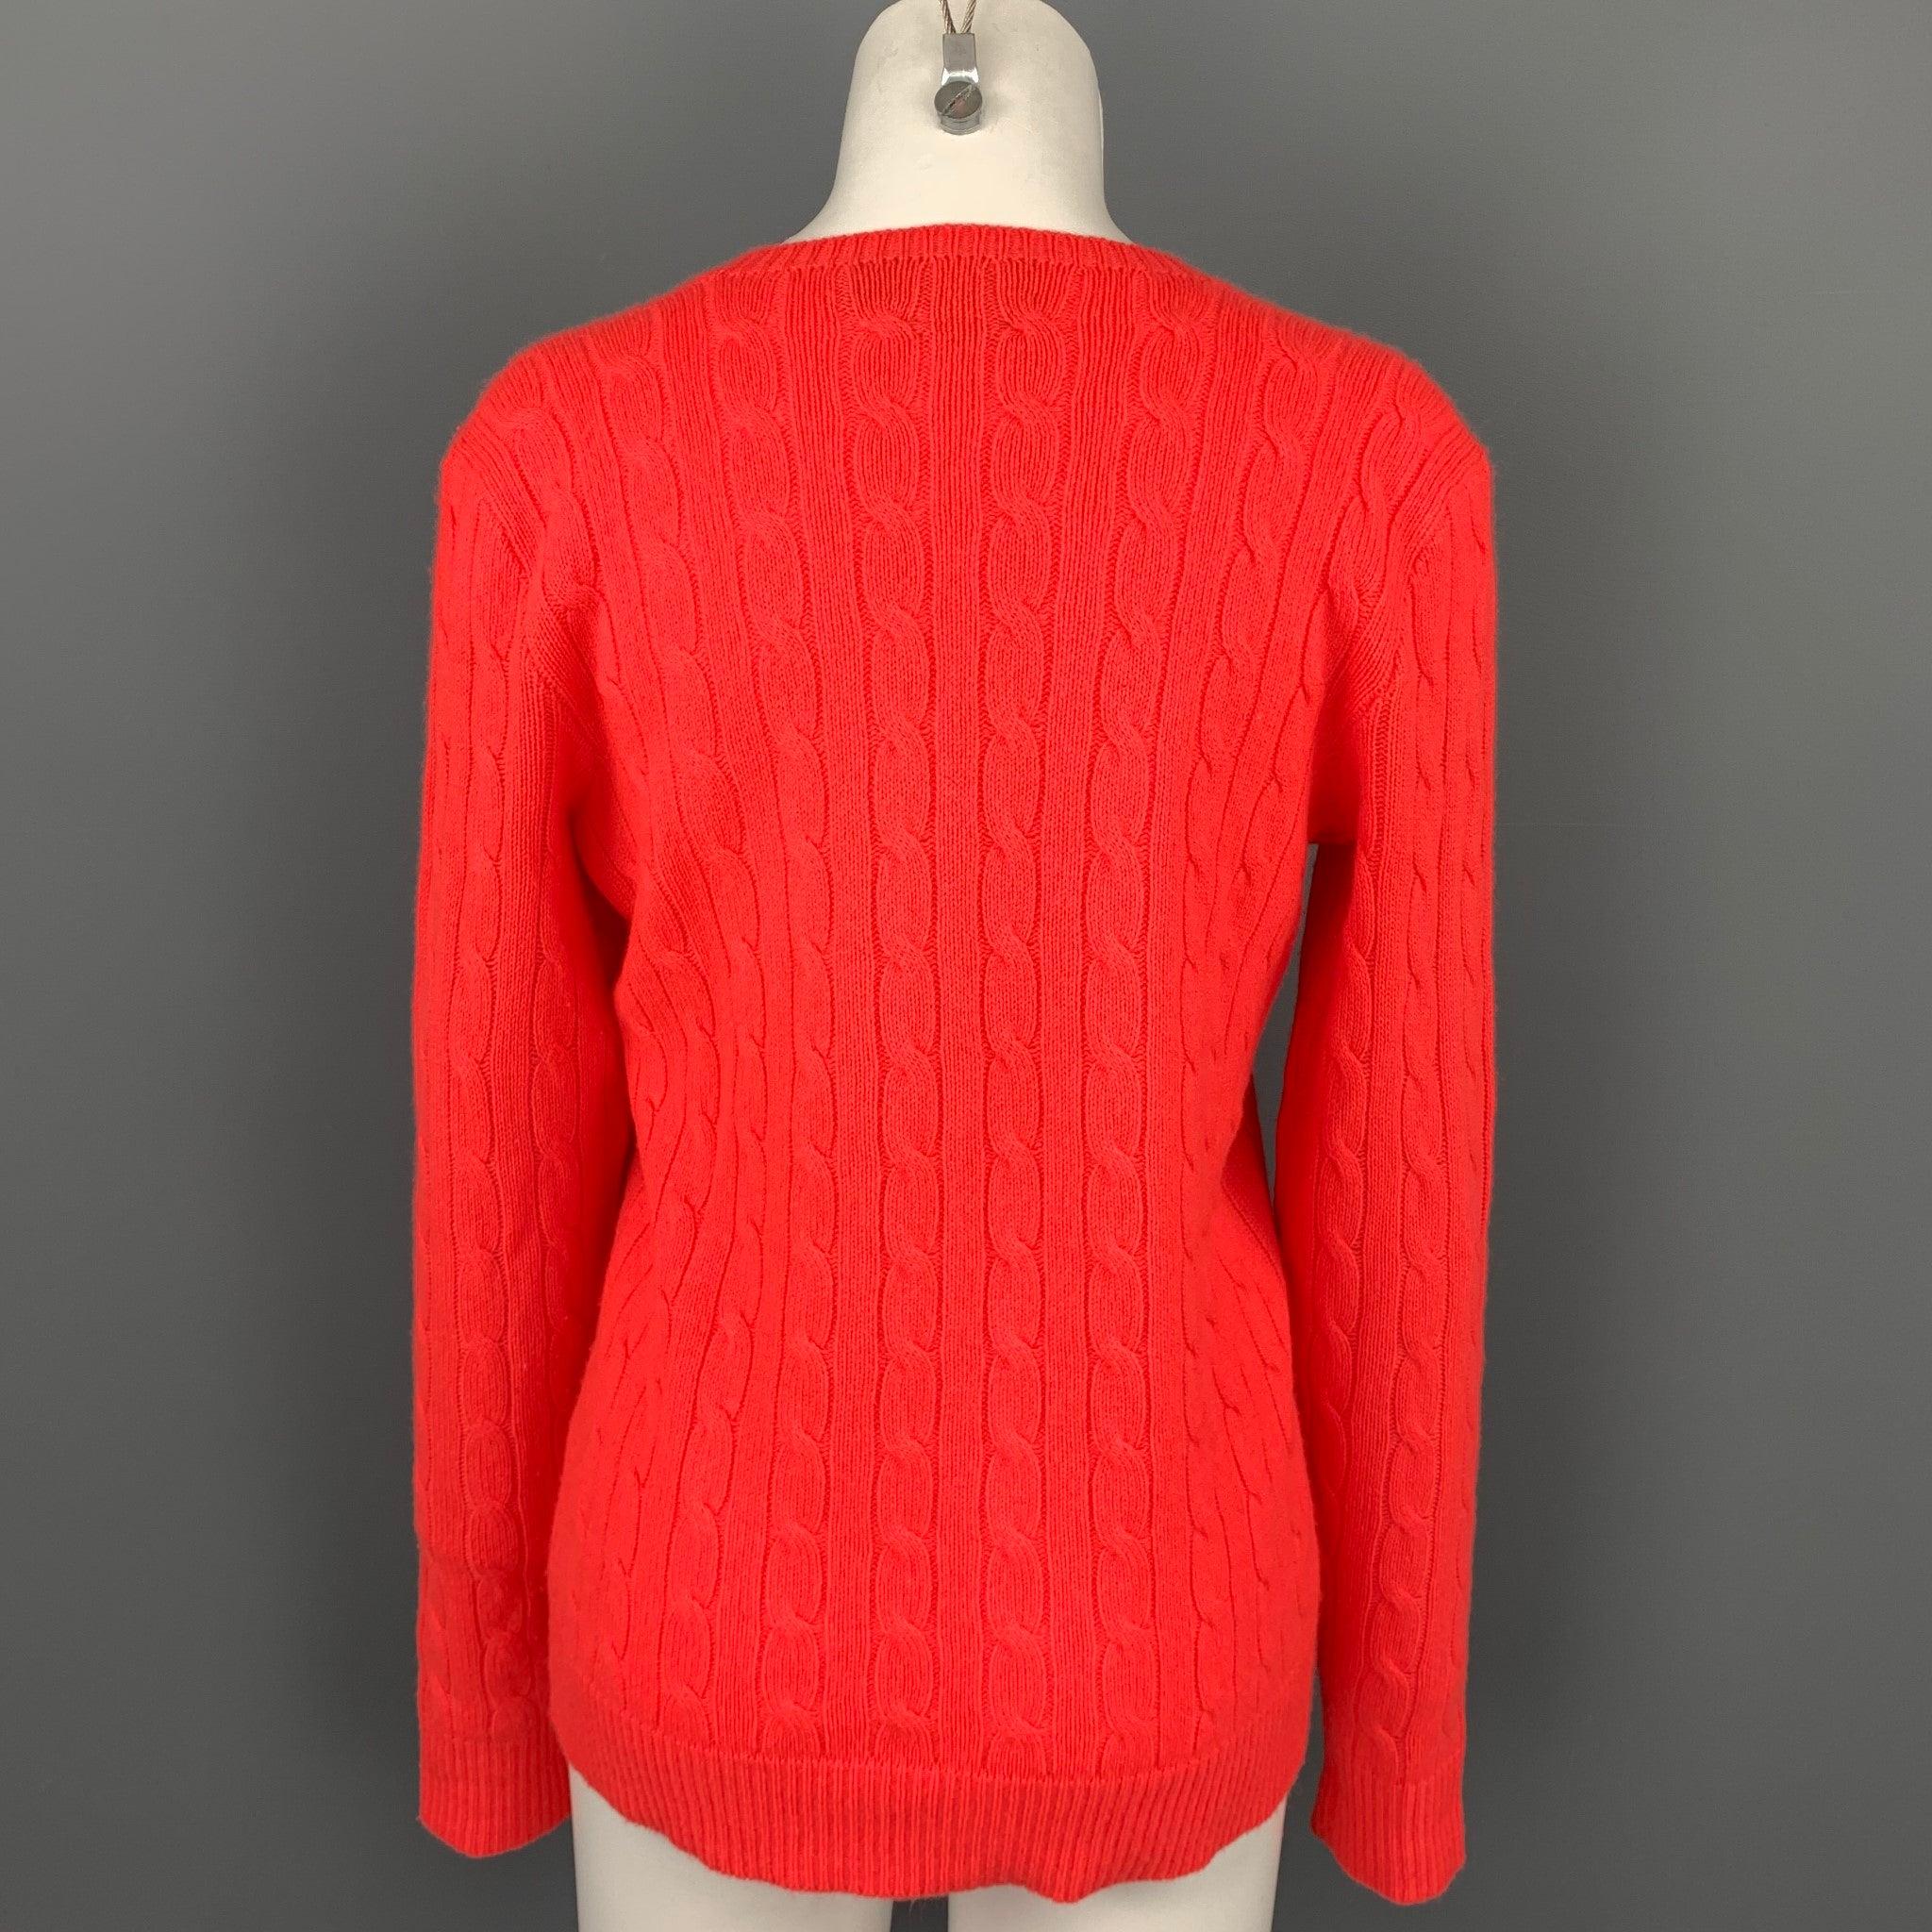 POLO by RALPH LAUREN Size M Orange Cable Knit Cashmere V-Neck Sweater In Good Condition For Sale In San Francisco, CA